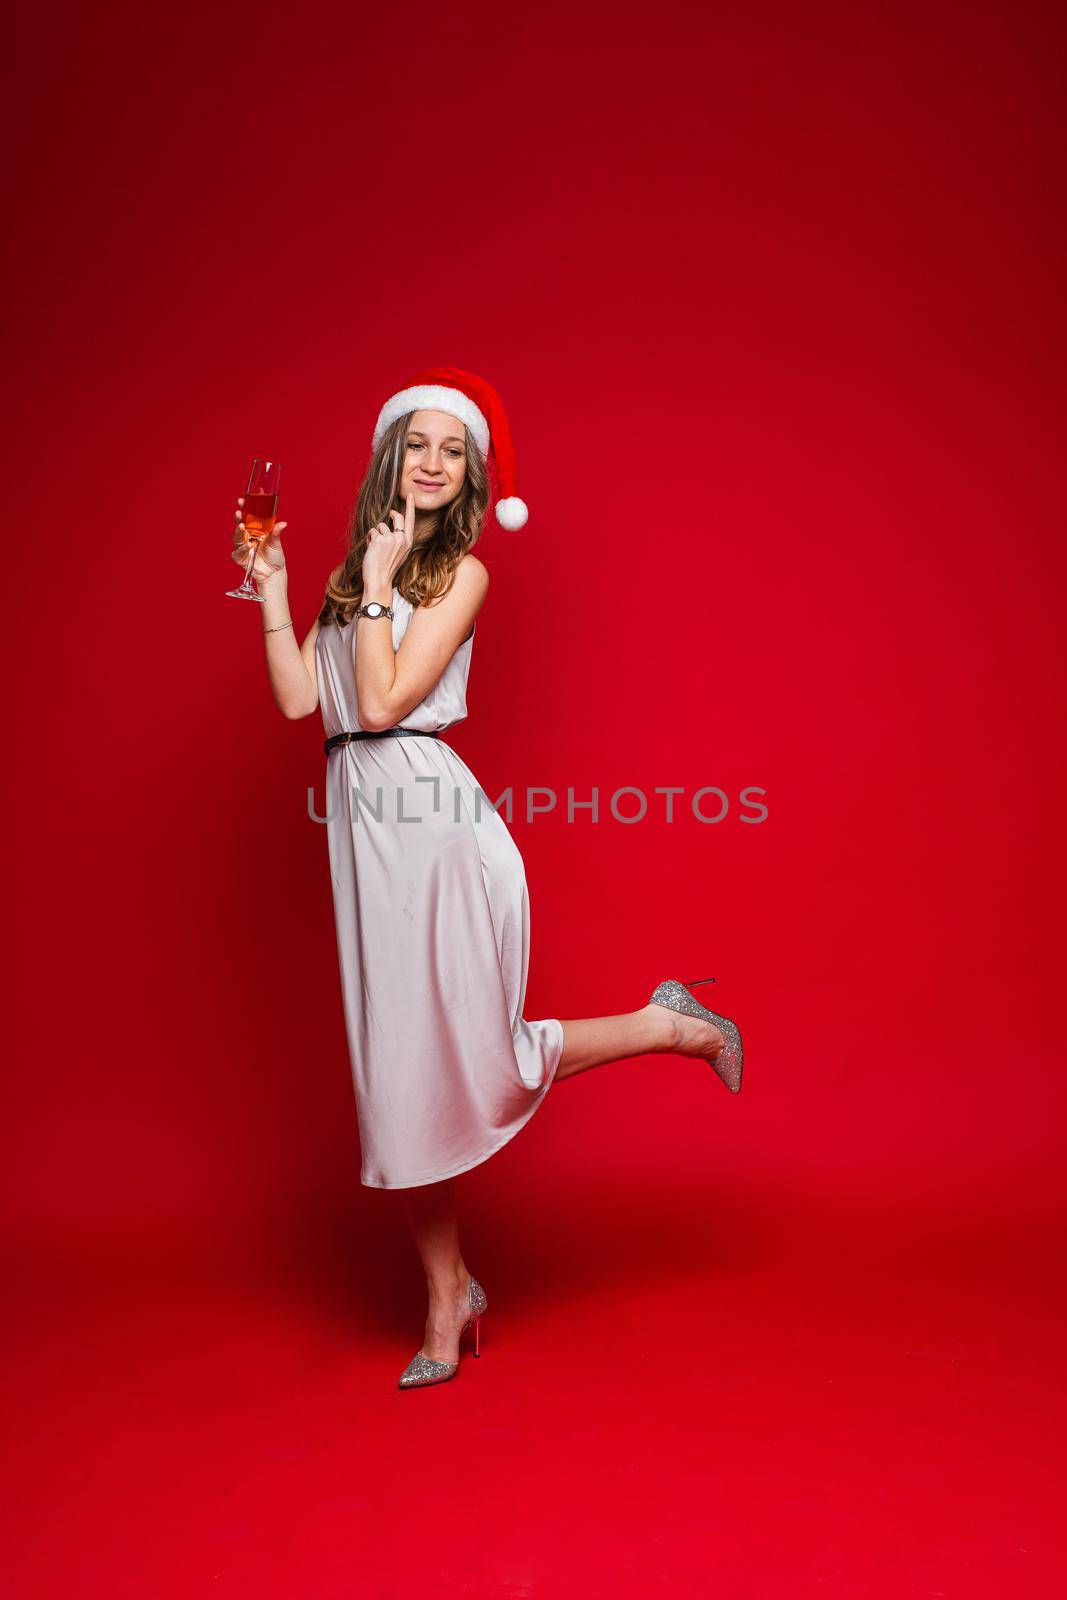 caucasian woman with attractive appearance holds a glass of white wine, picture isolated on red background